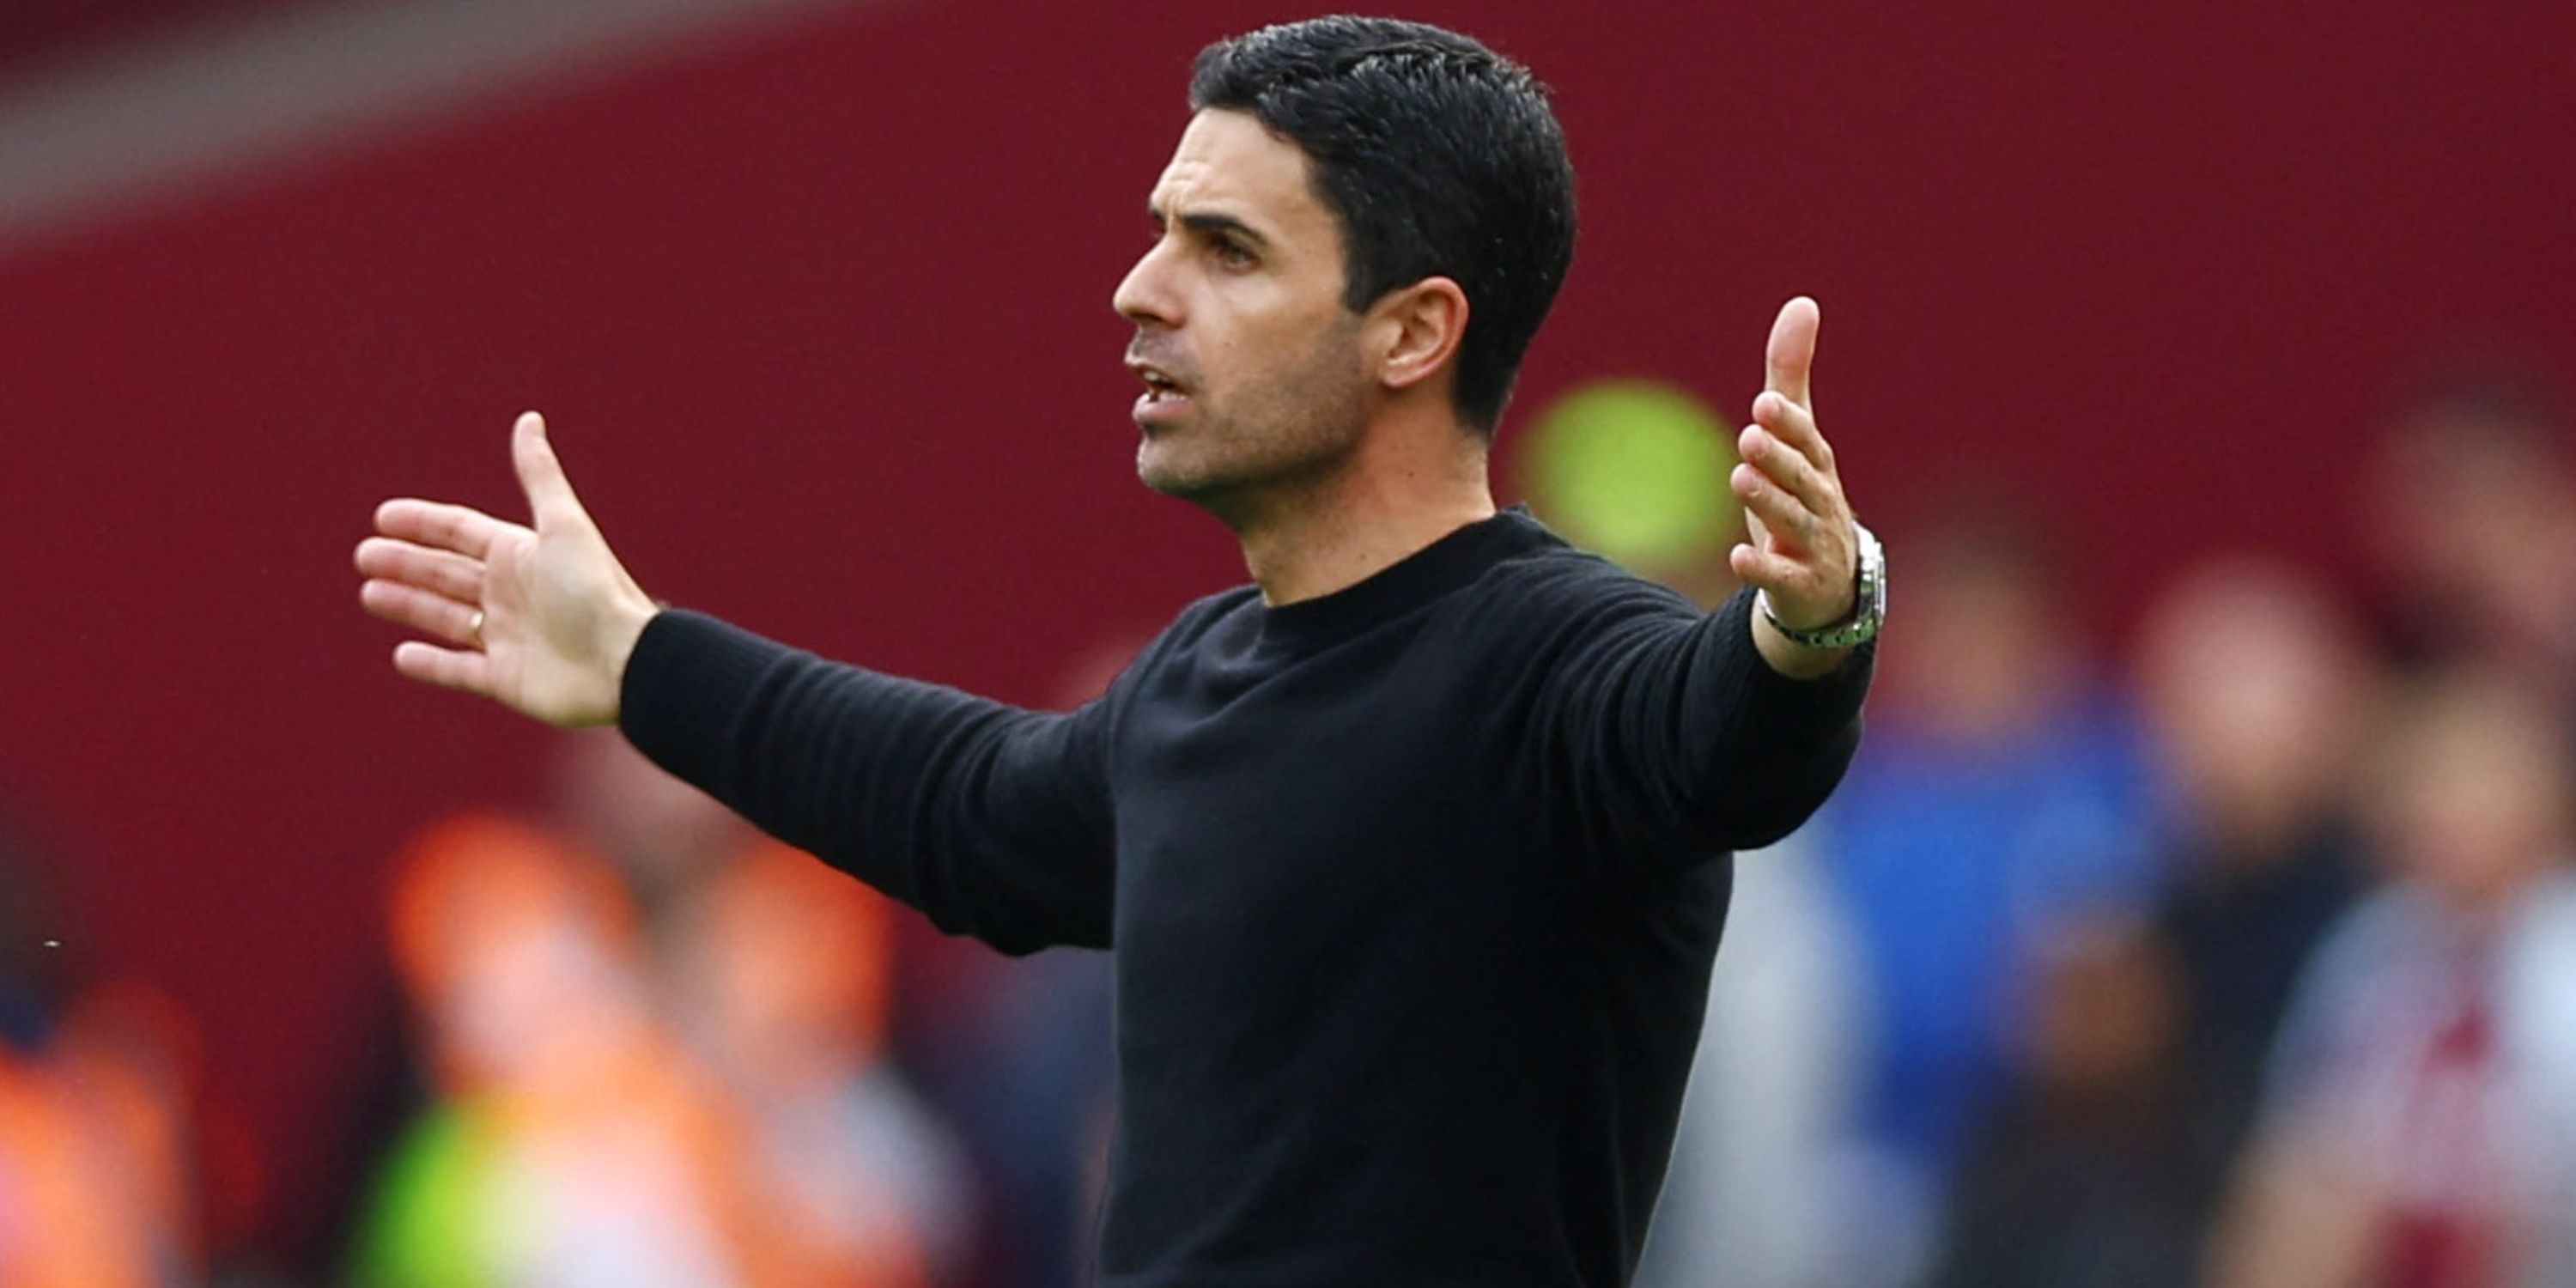 Arsenal manager Mikel Arteta with arms in the air